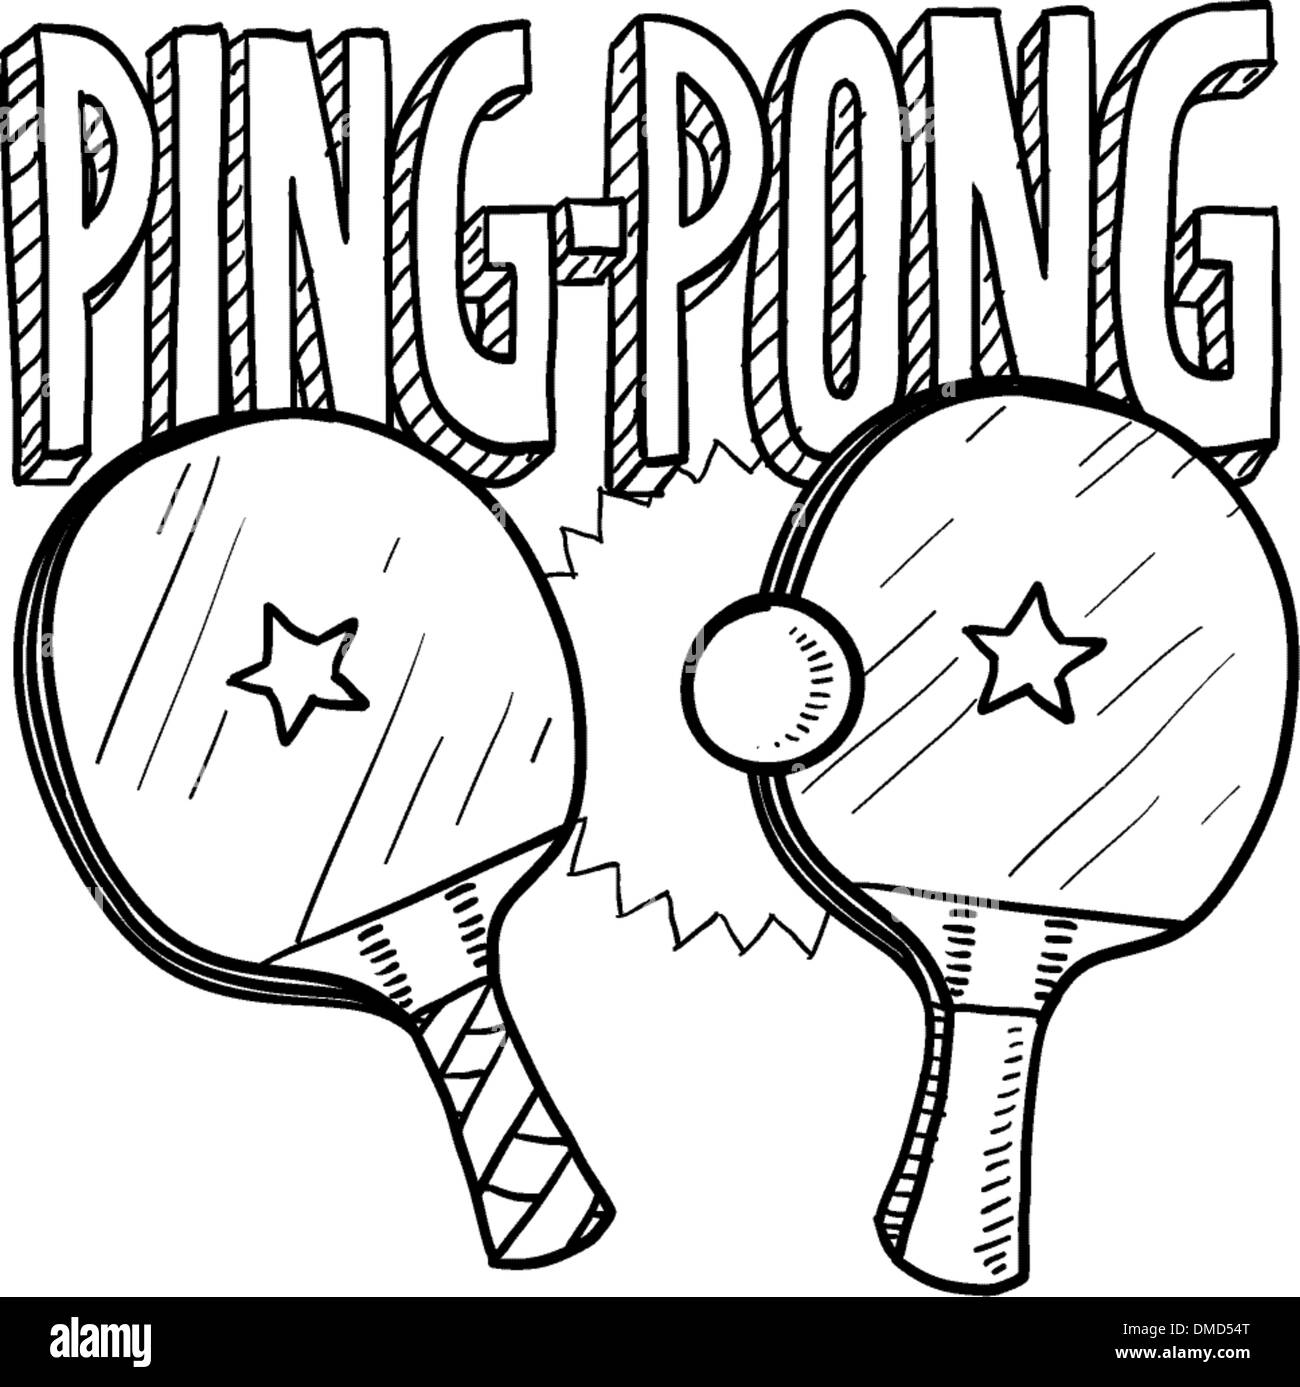 Ping pong sketch Black and White Stock Photos & Images - Alamy